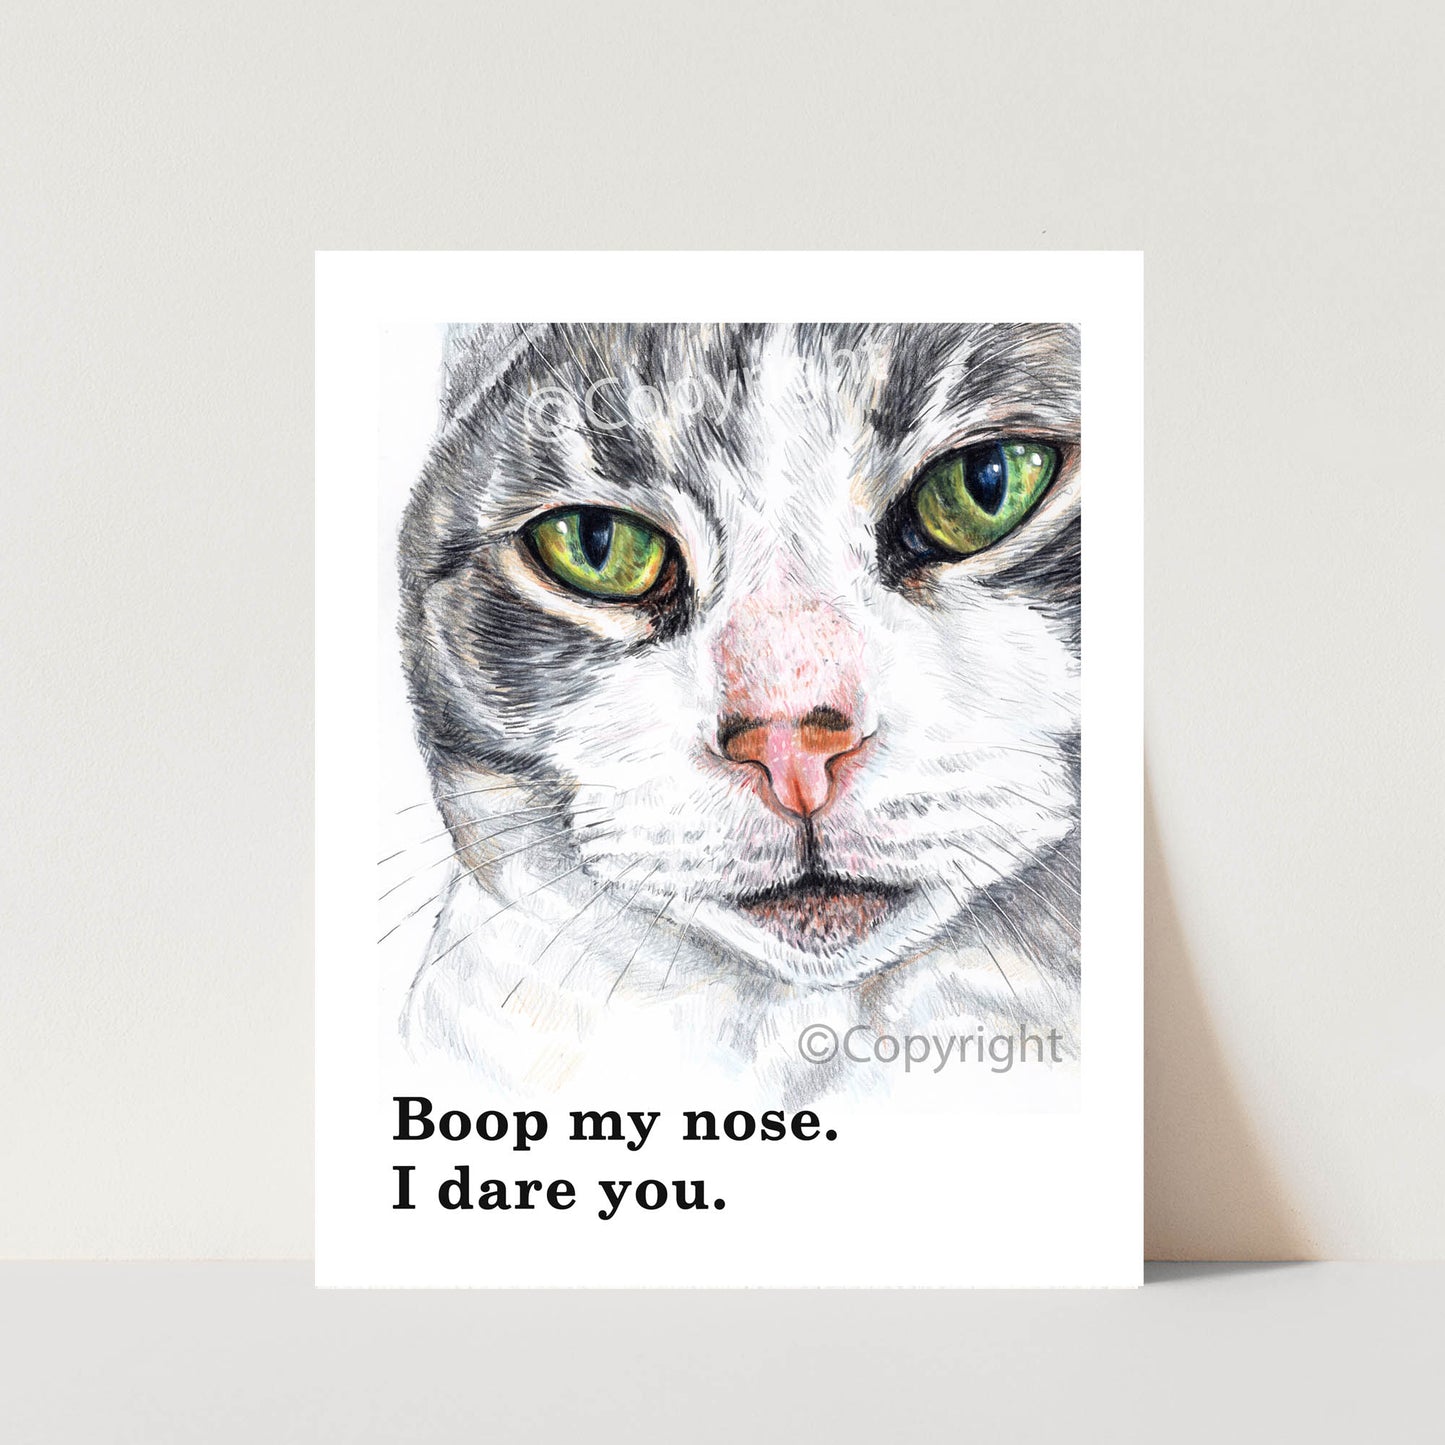 Crayon drawing of a grey tabby cat daring you to boop her nose. Art by Deidre Wicks